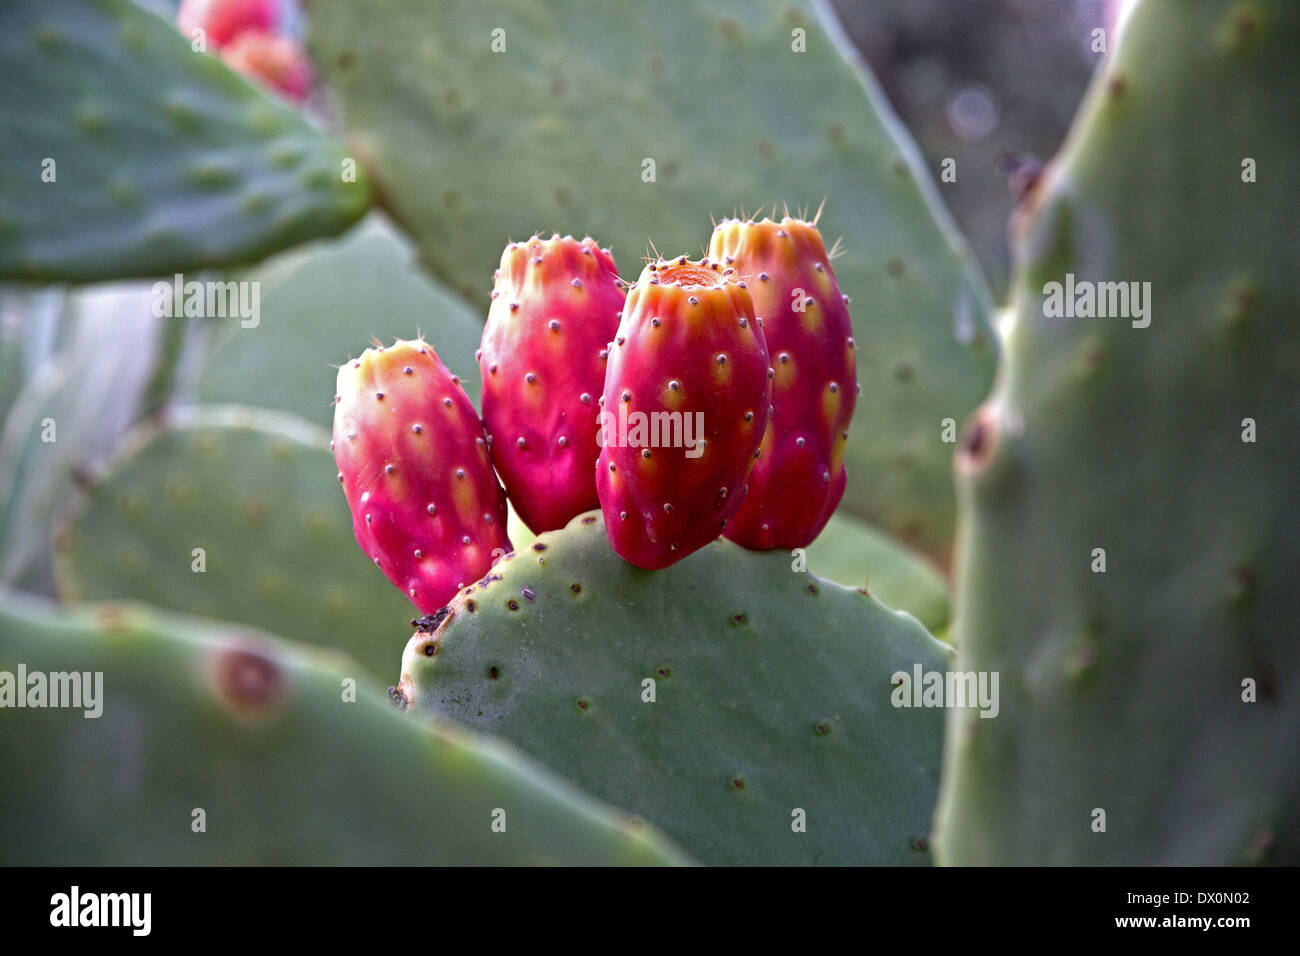 Prickly pears on cactus plant Stock Photo